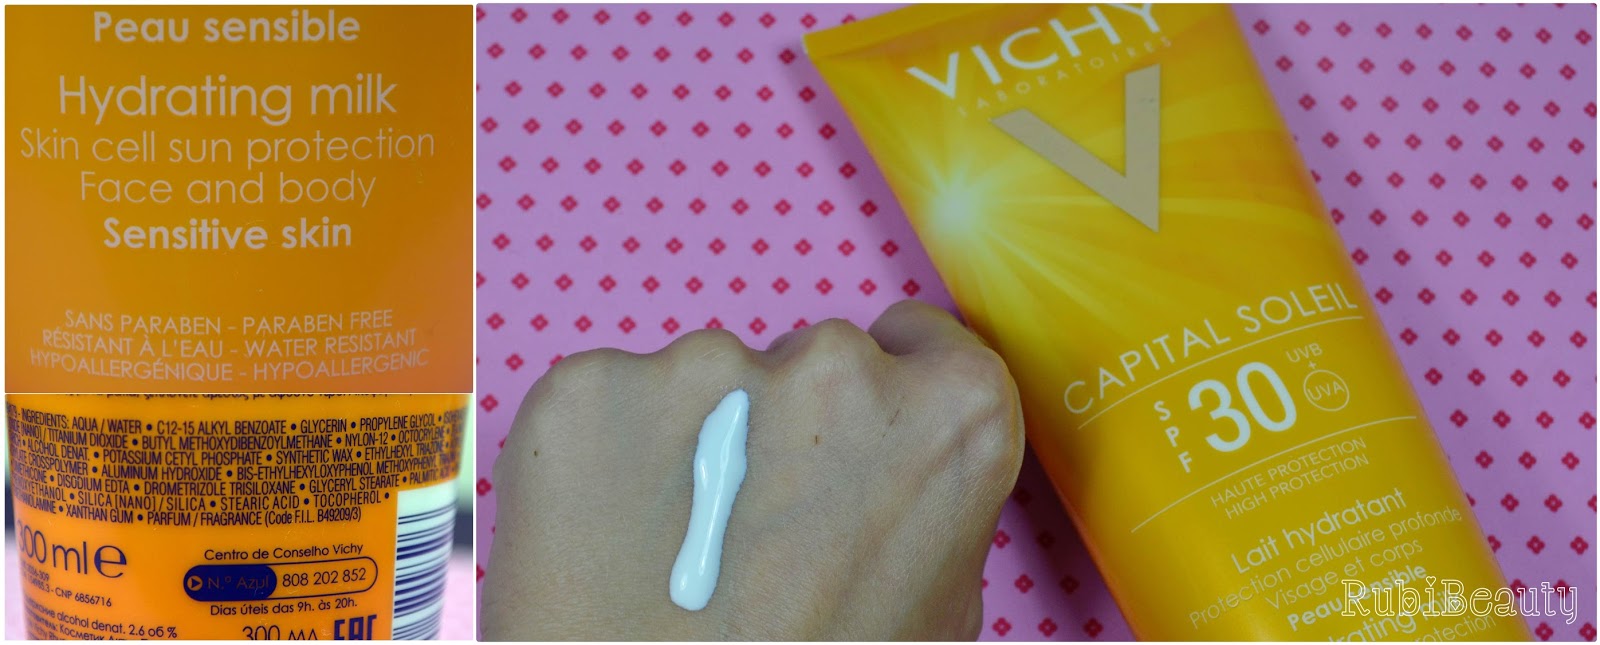 rubibeauty summer review vichy capital soleil protector solar swatch